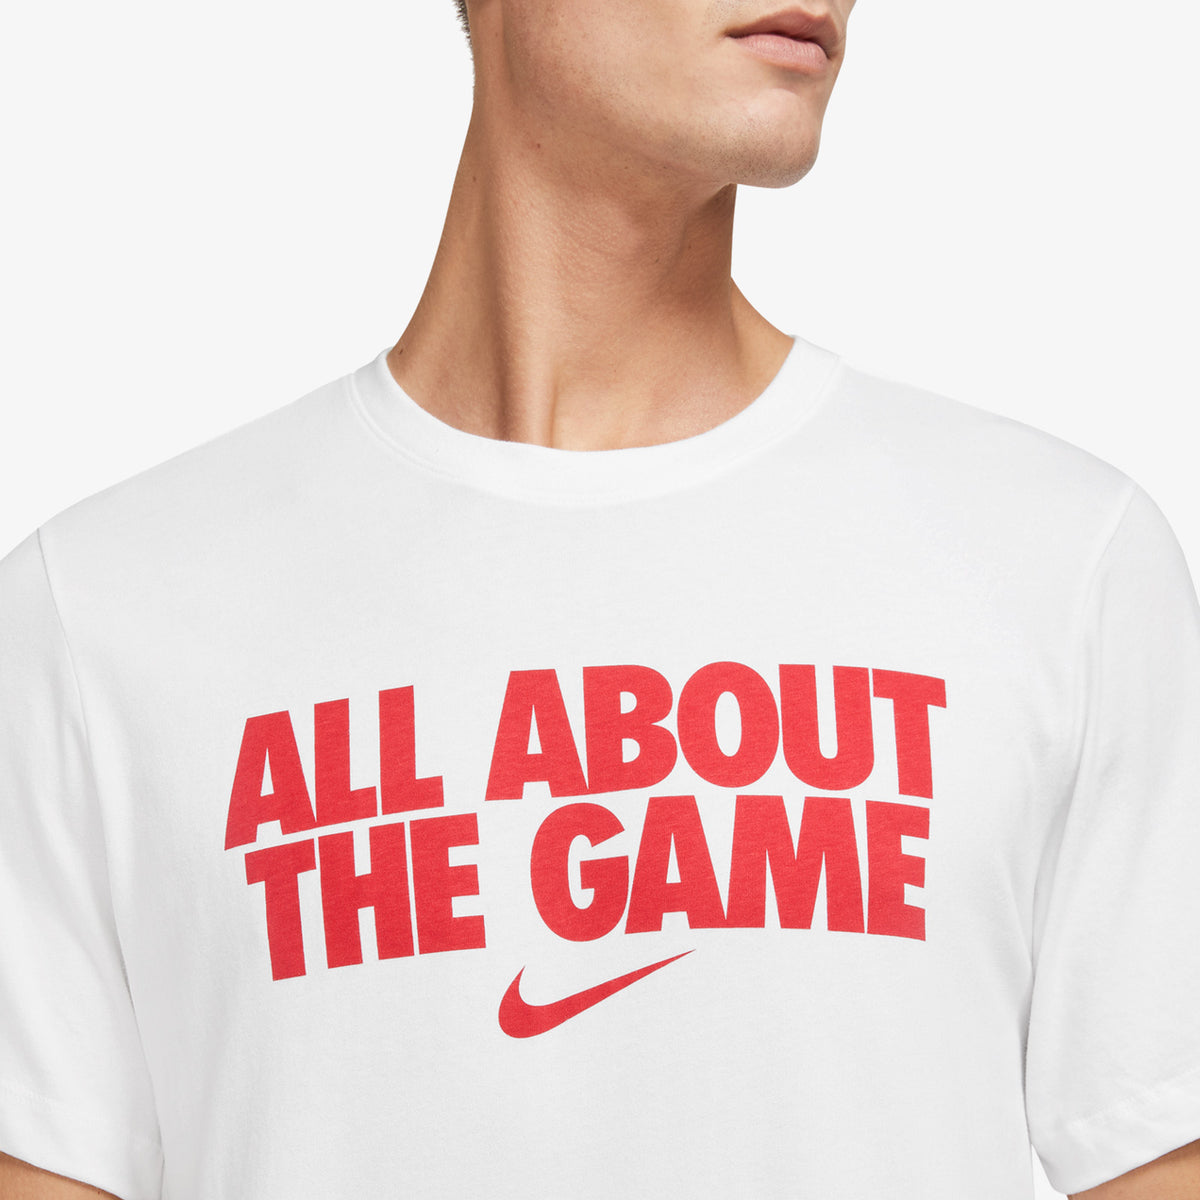 All About The Game T-Shirt - White